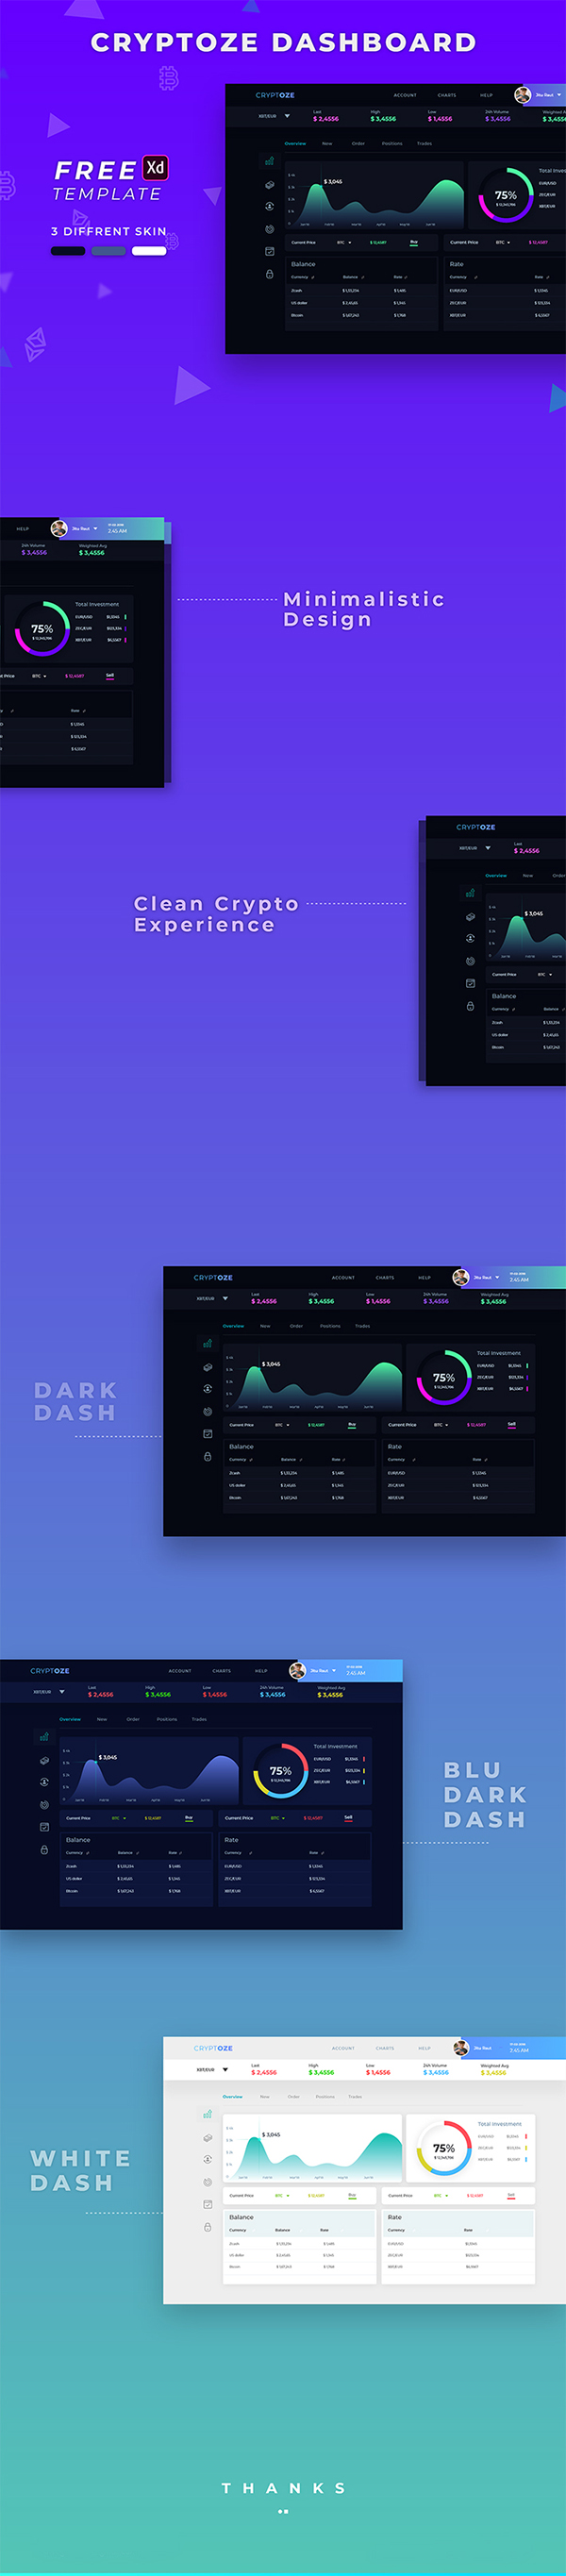 Cryptoze Dashboard UI Design Free PSD Download